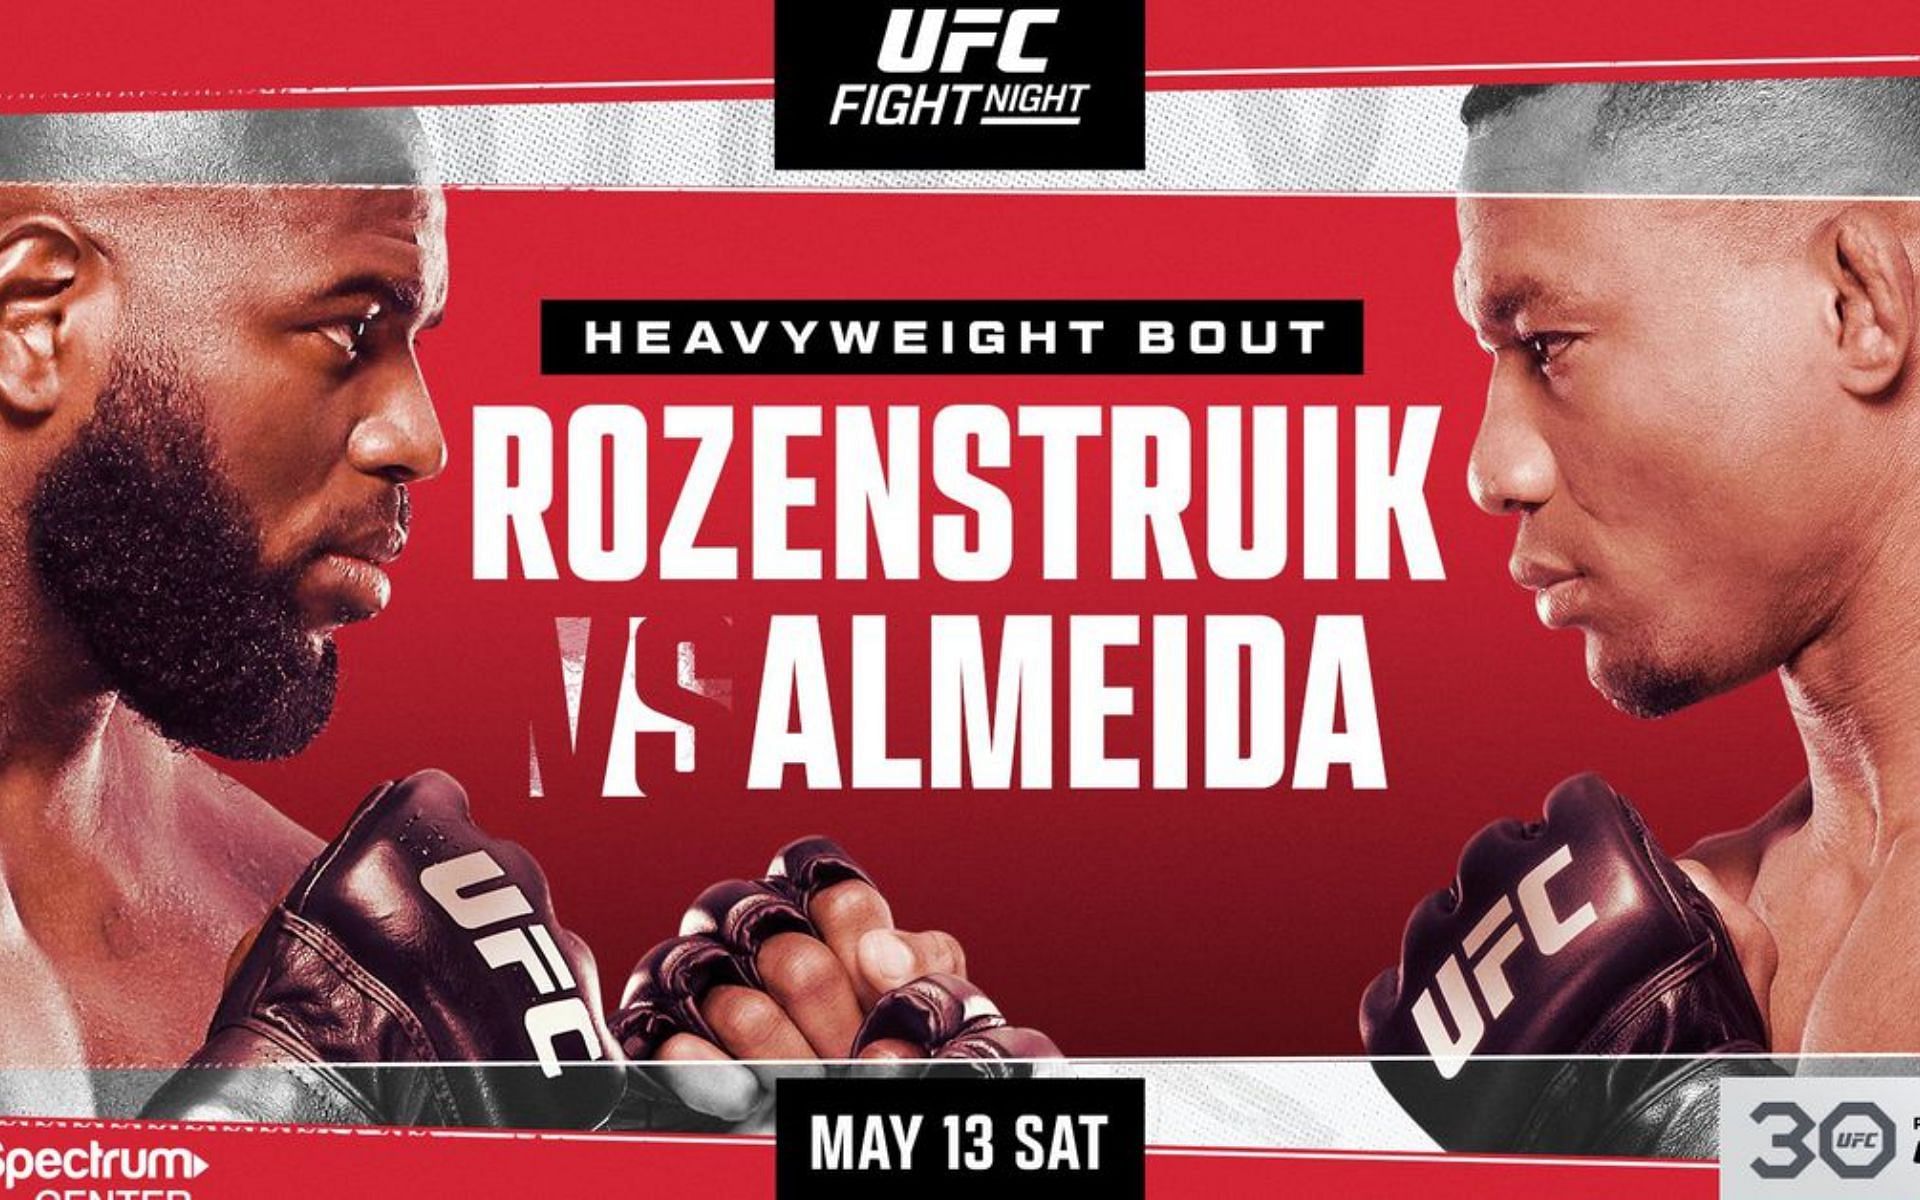 The UFC heads to Charlotte with a big heavyweight main event this weekend